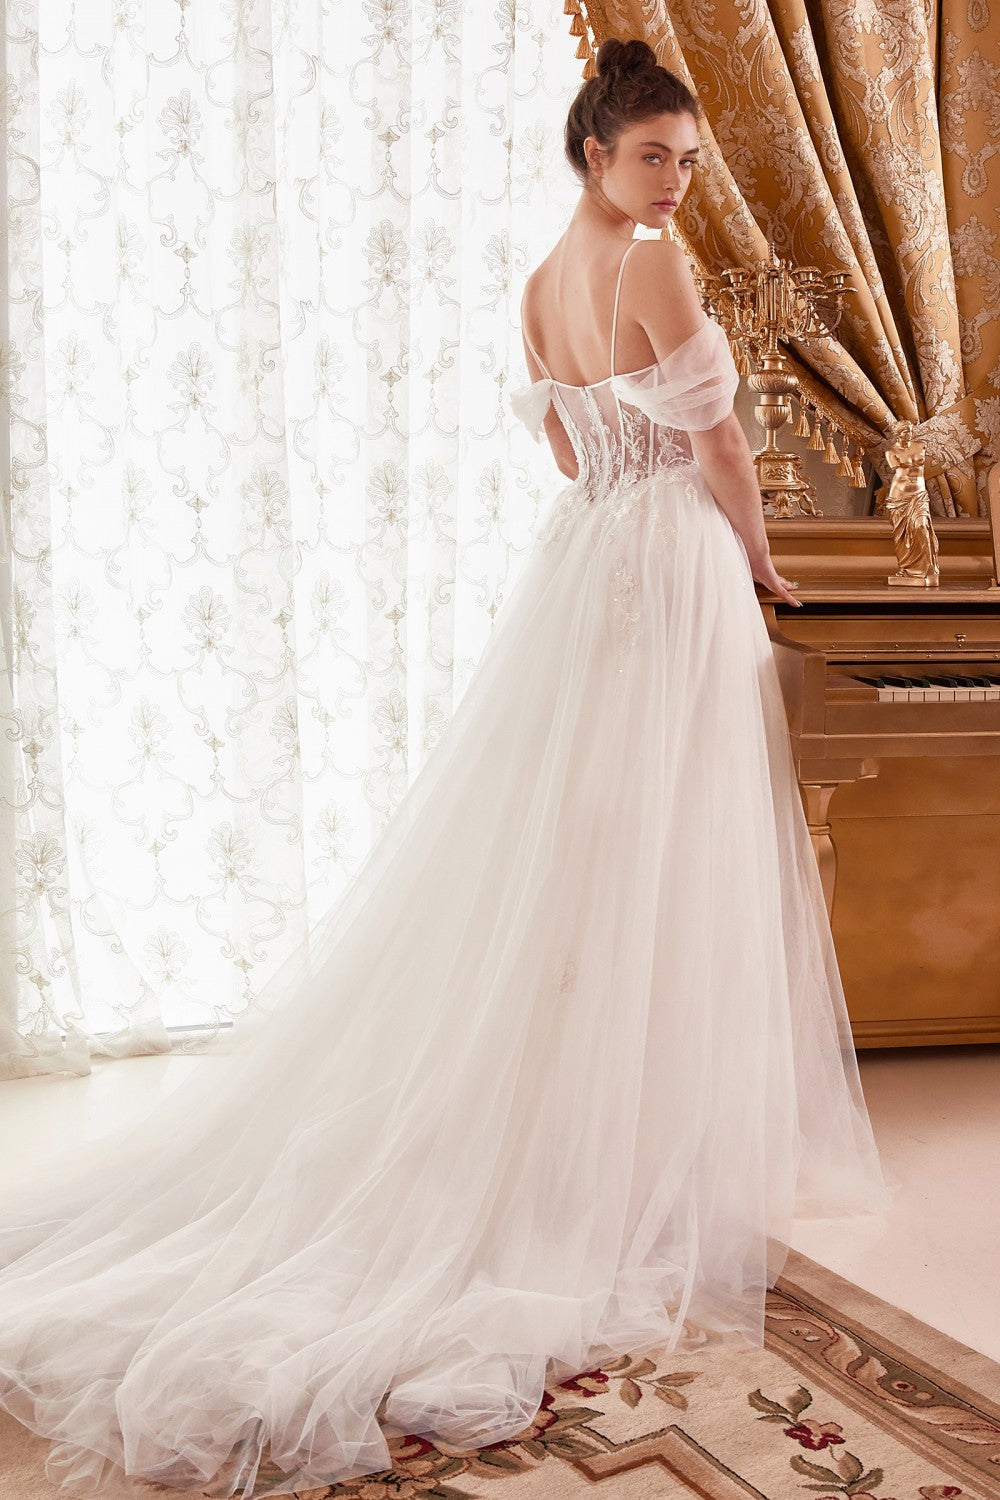 Off-White_1 Layered Tulle A-Line Bridal Gown with Corset Bodice WN307